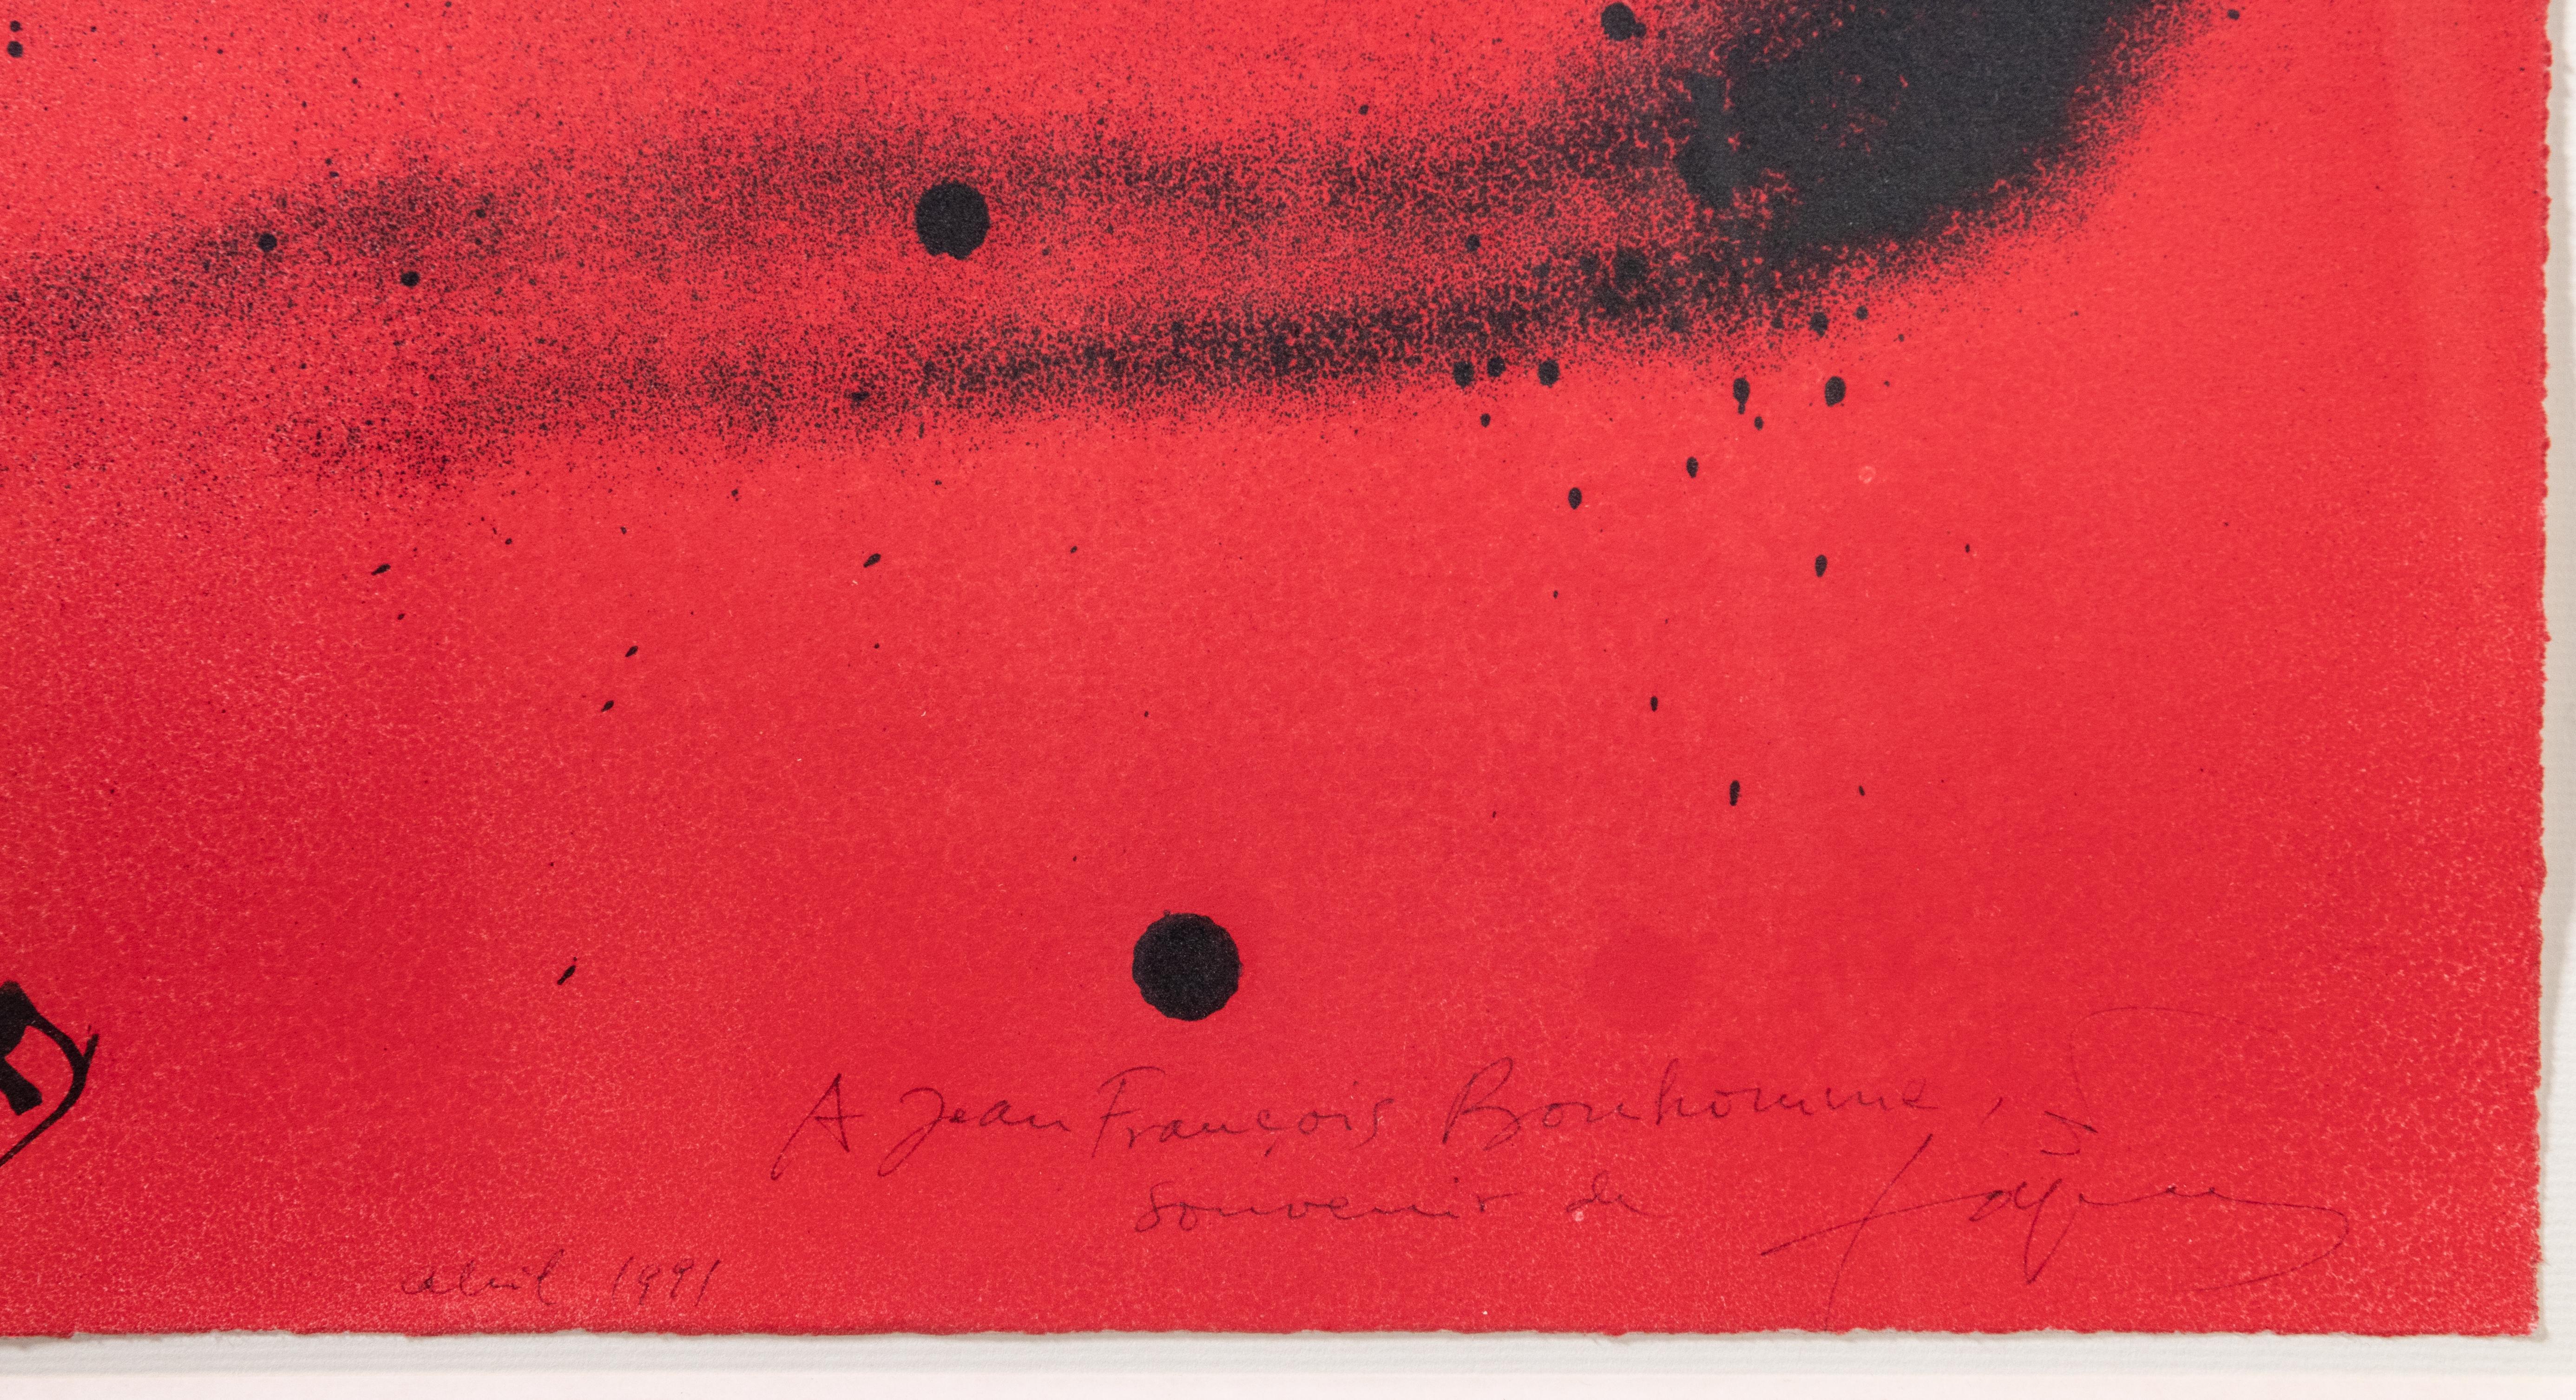 Memoria Personal - Lithograph by Antoni Tapies - 1988 - Contemporary Print by Antoni Tàpies